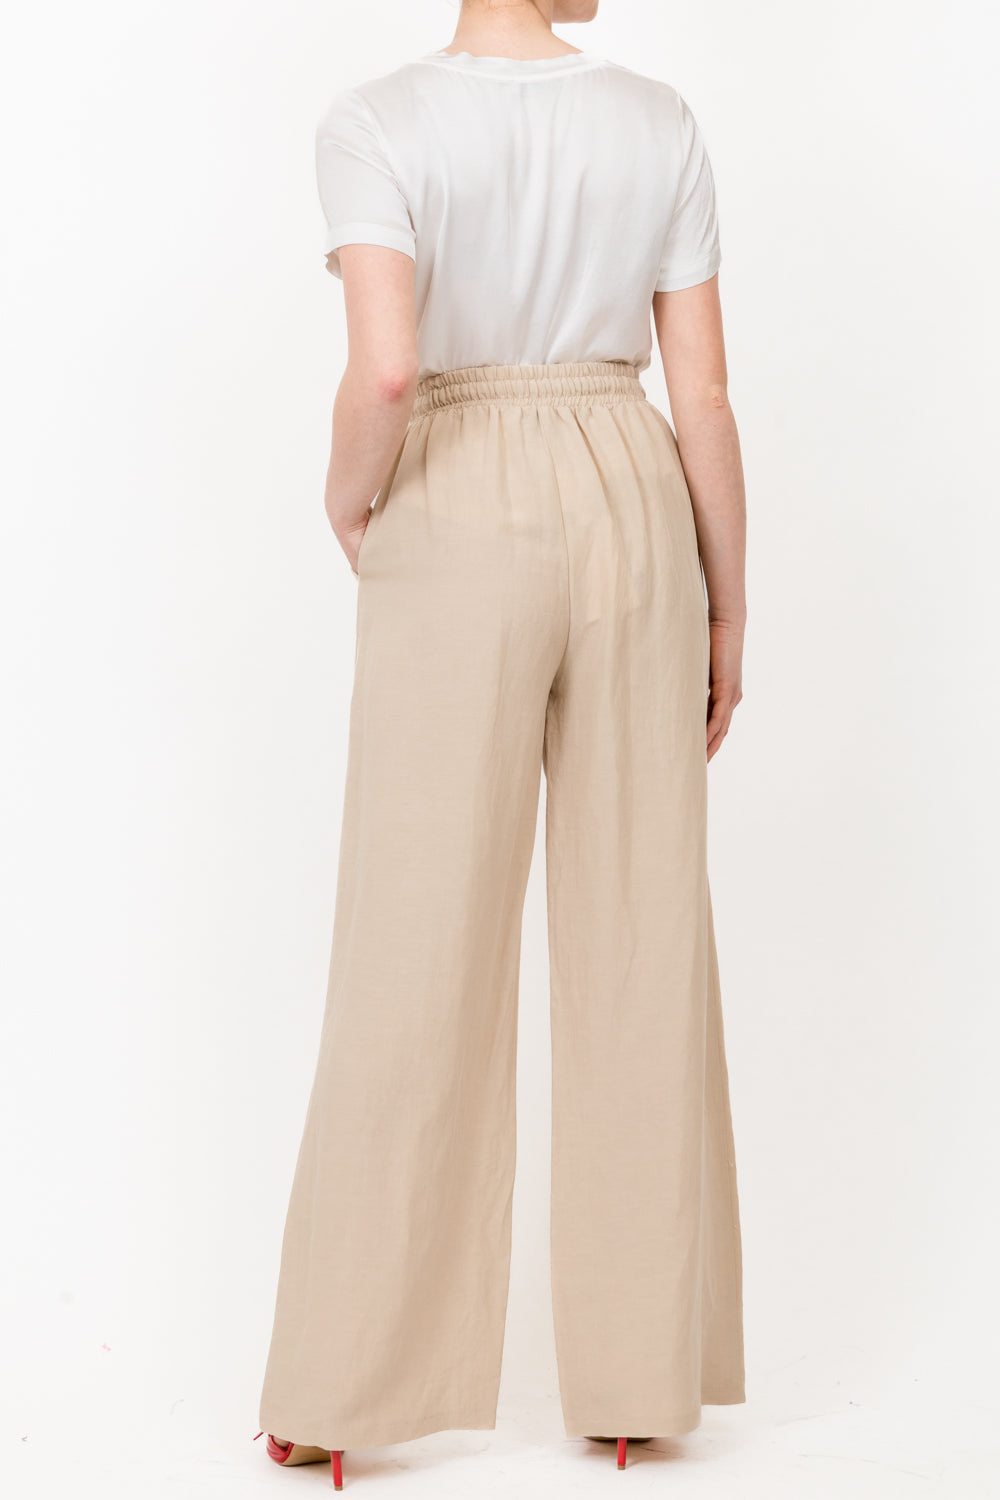 Have one - Pantalone dritto con coulisse Art. PVI-L291